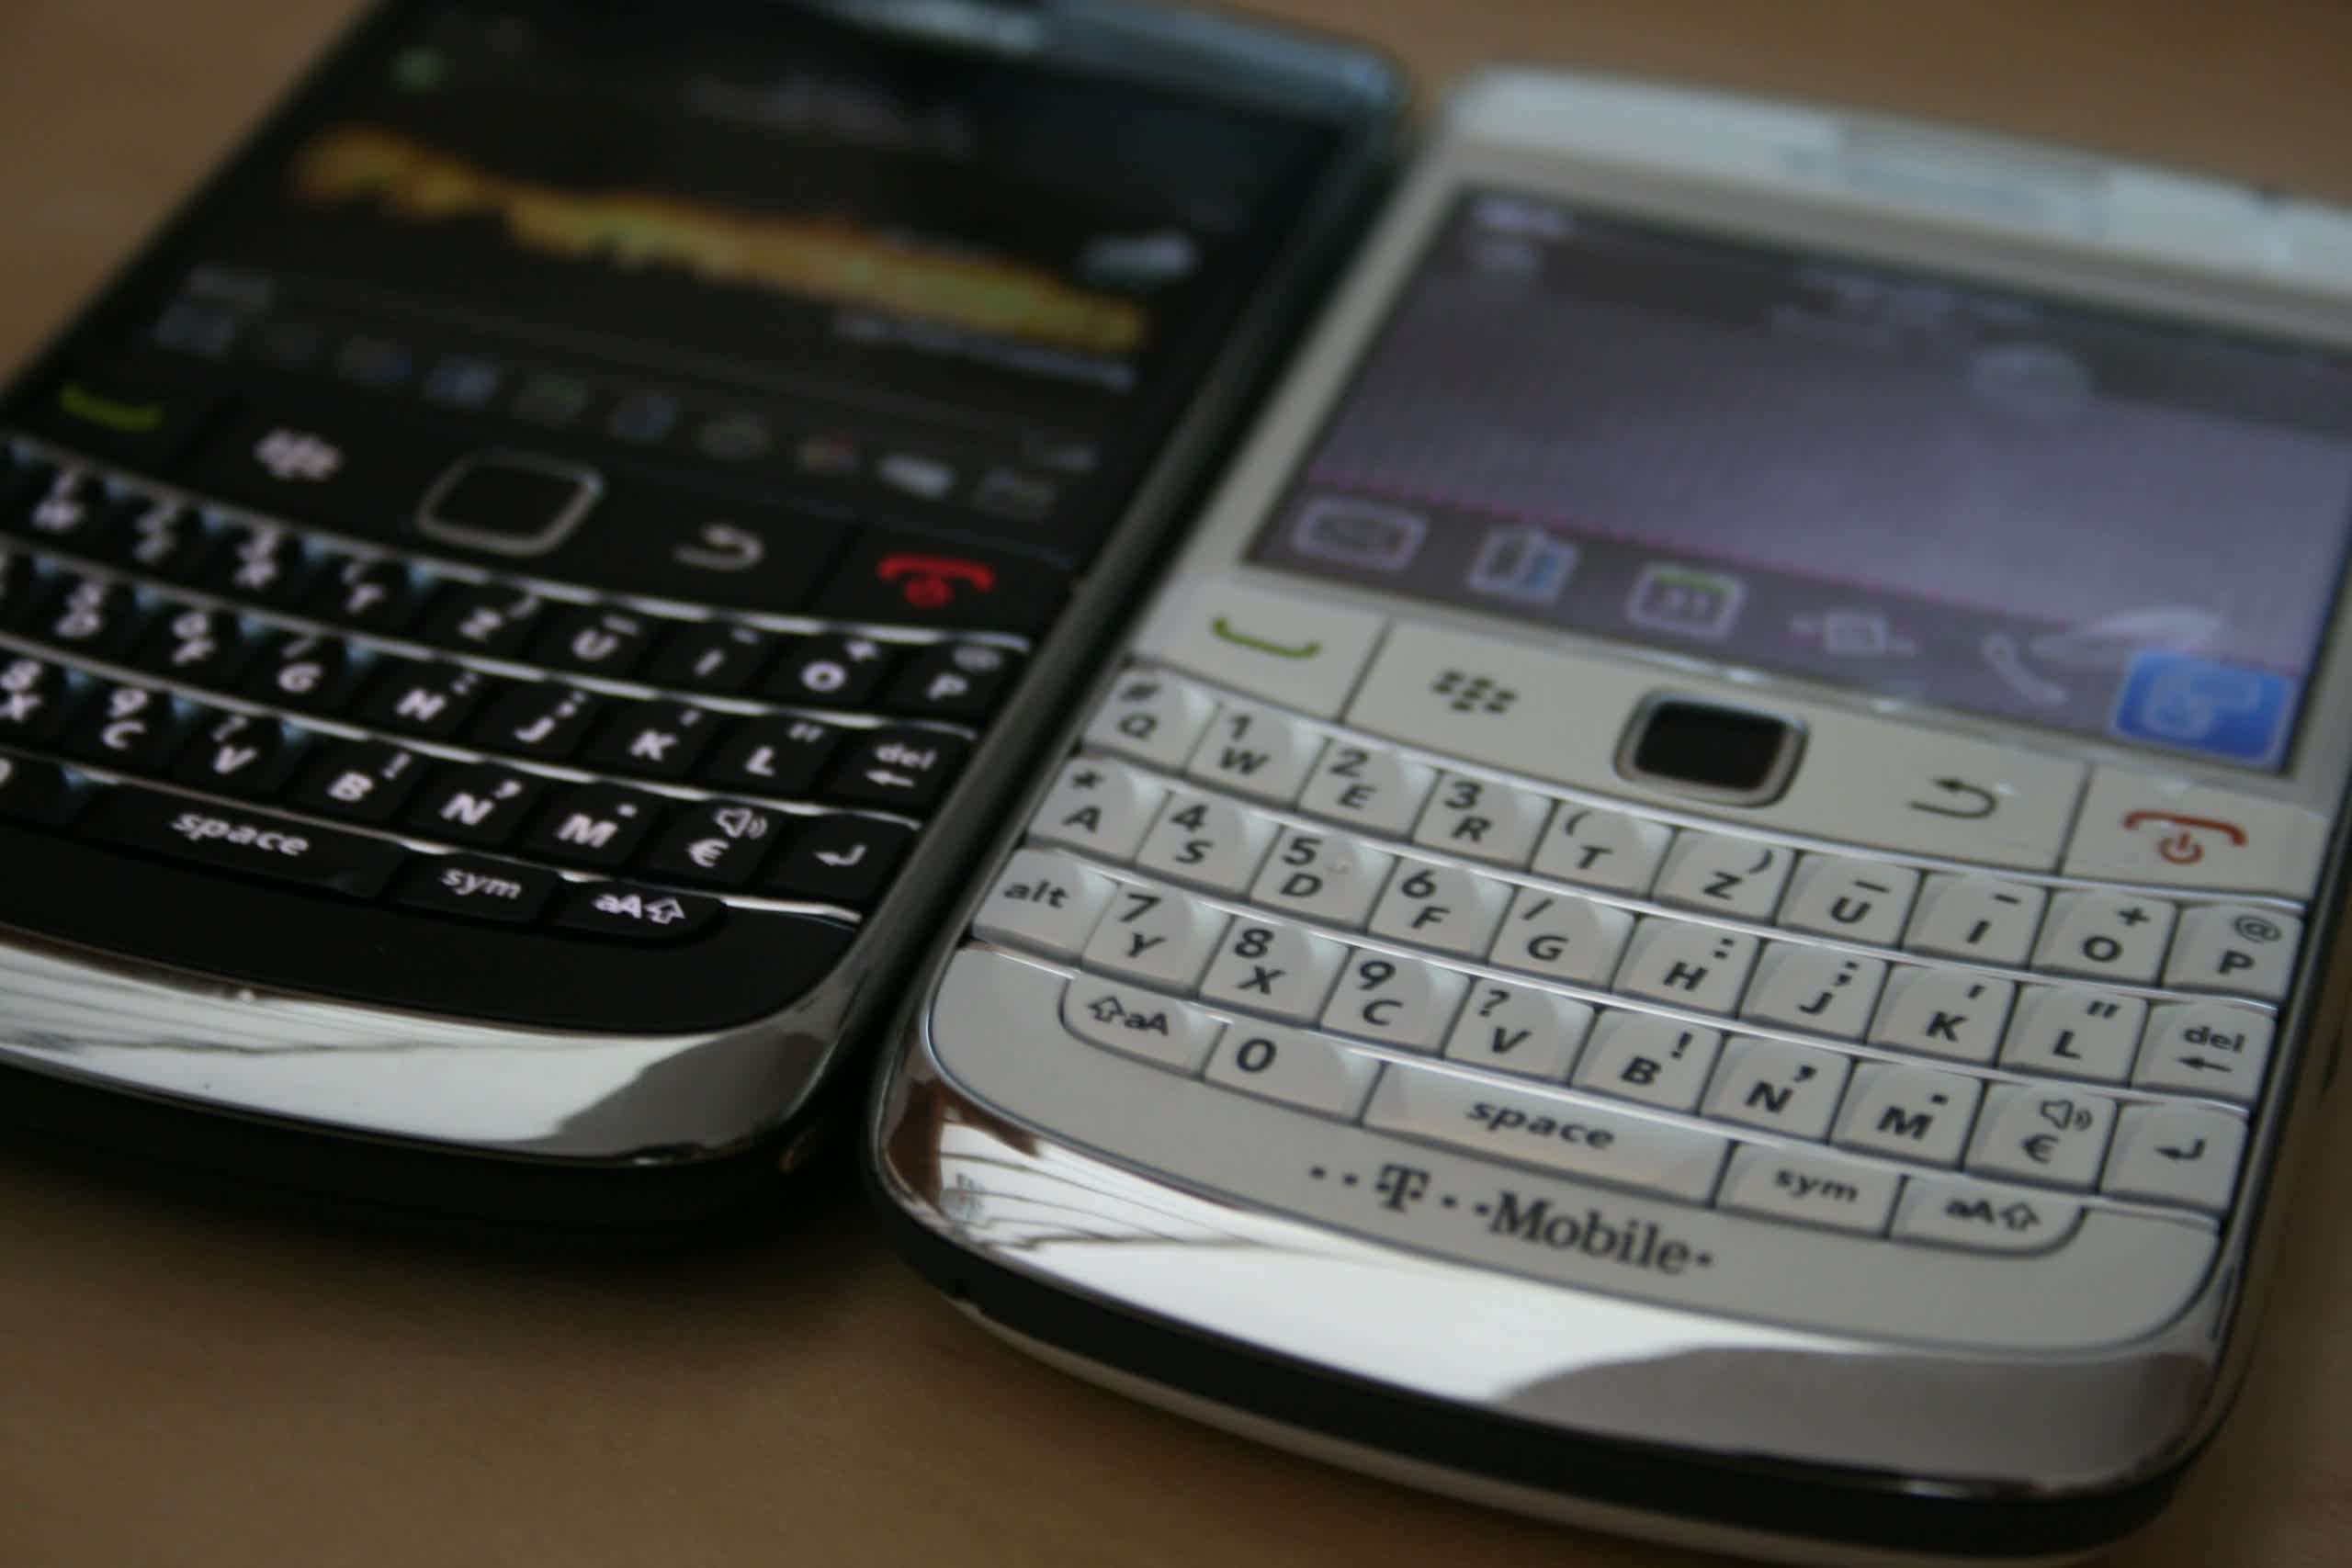 Old BlackBerry phones will stop functioning on January 4